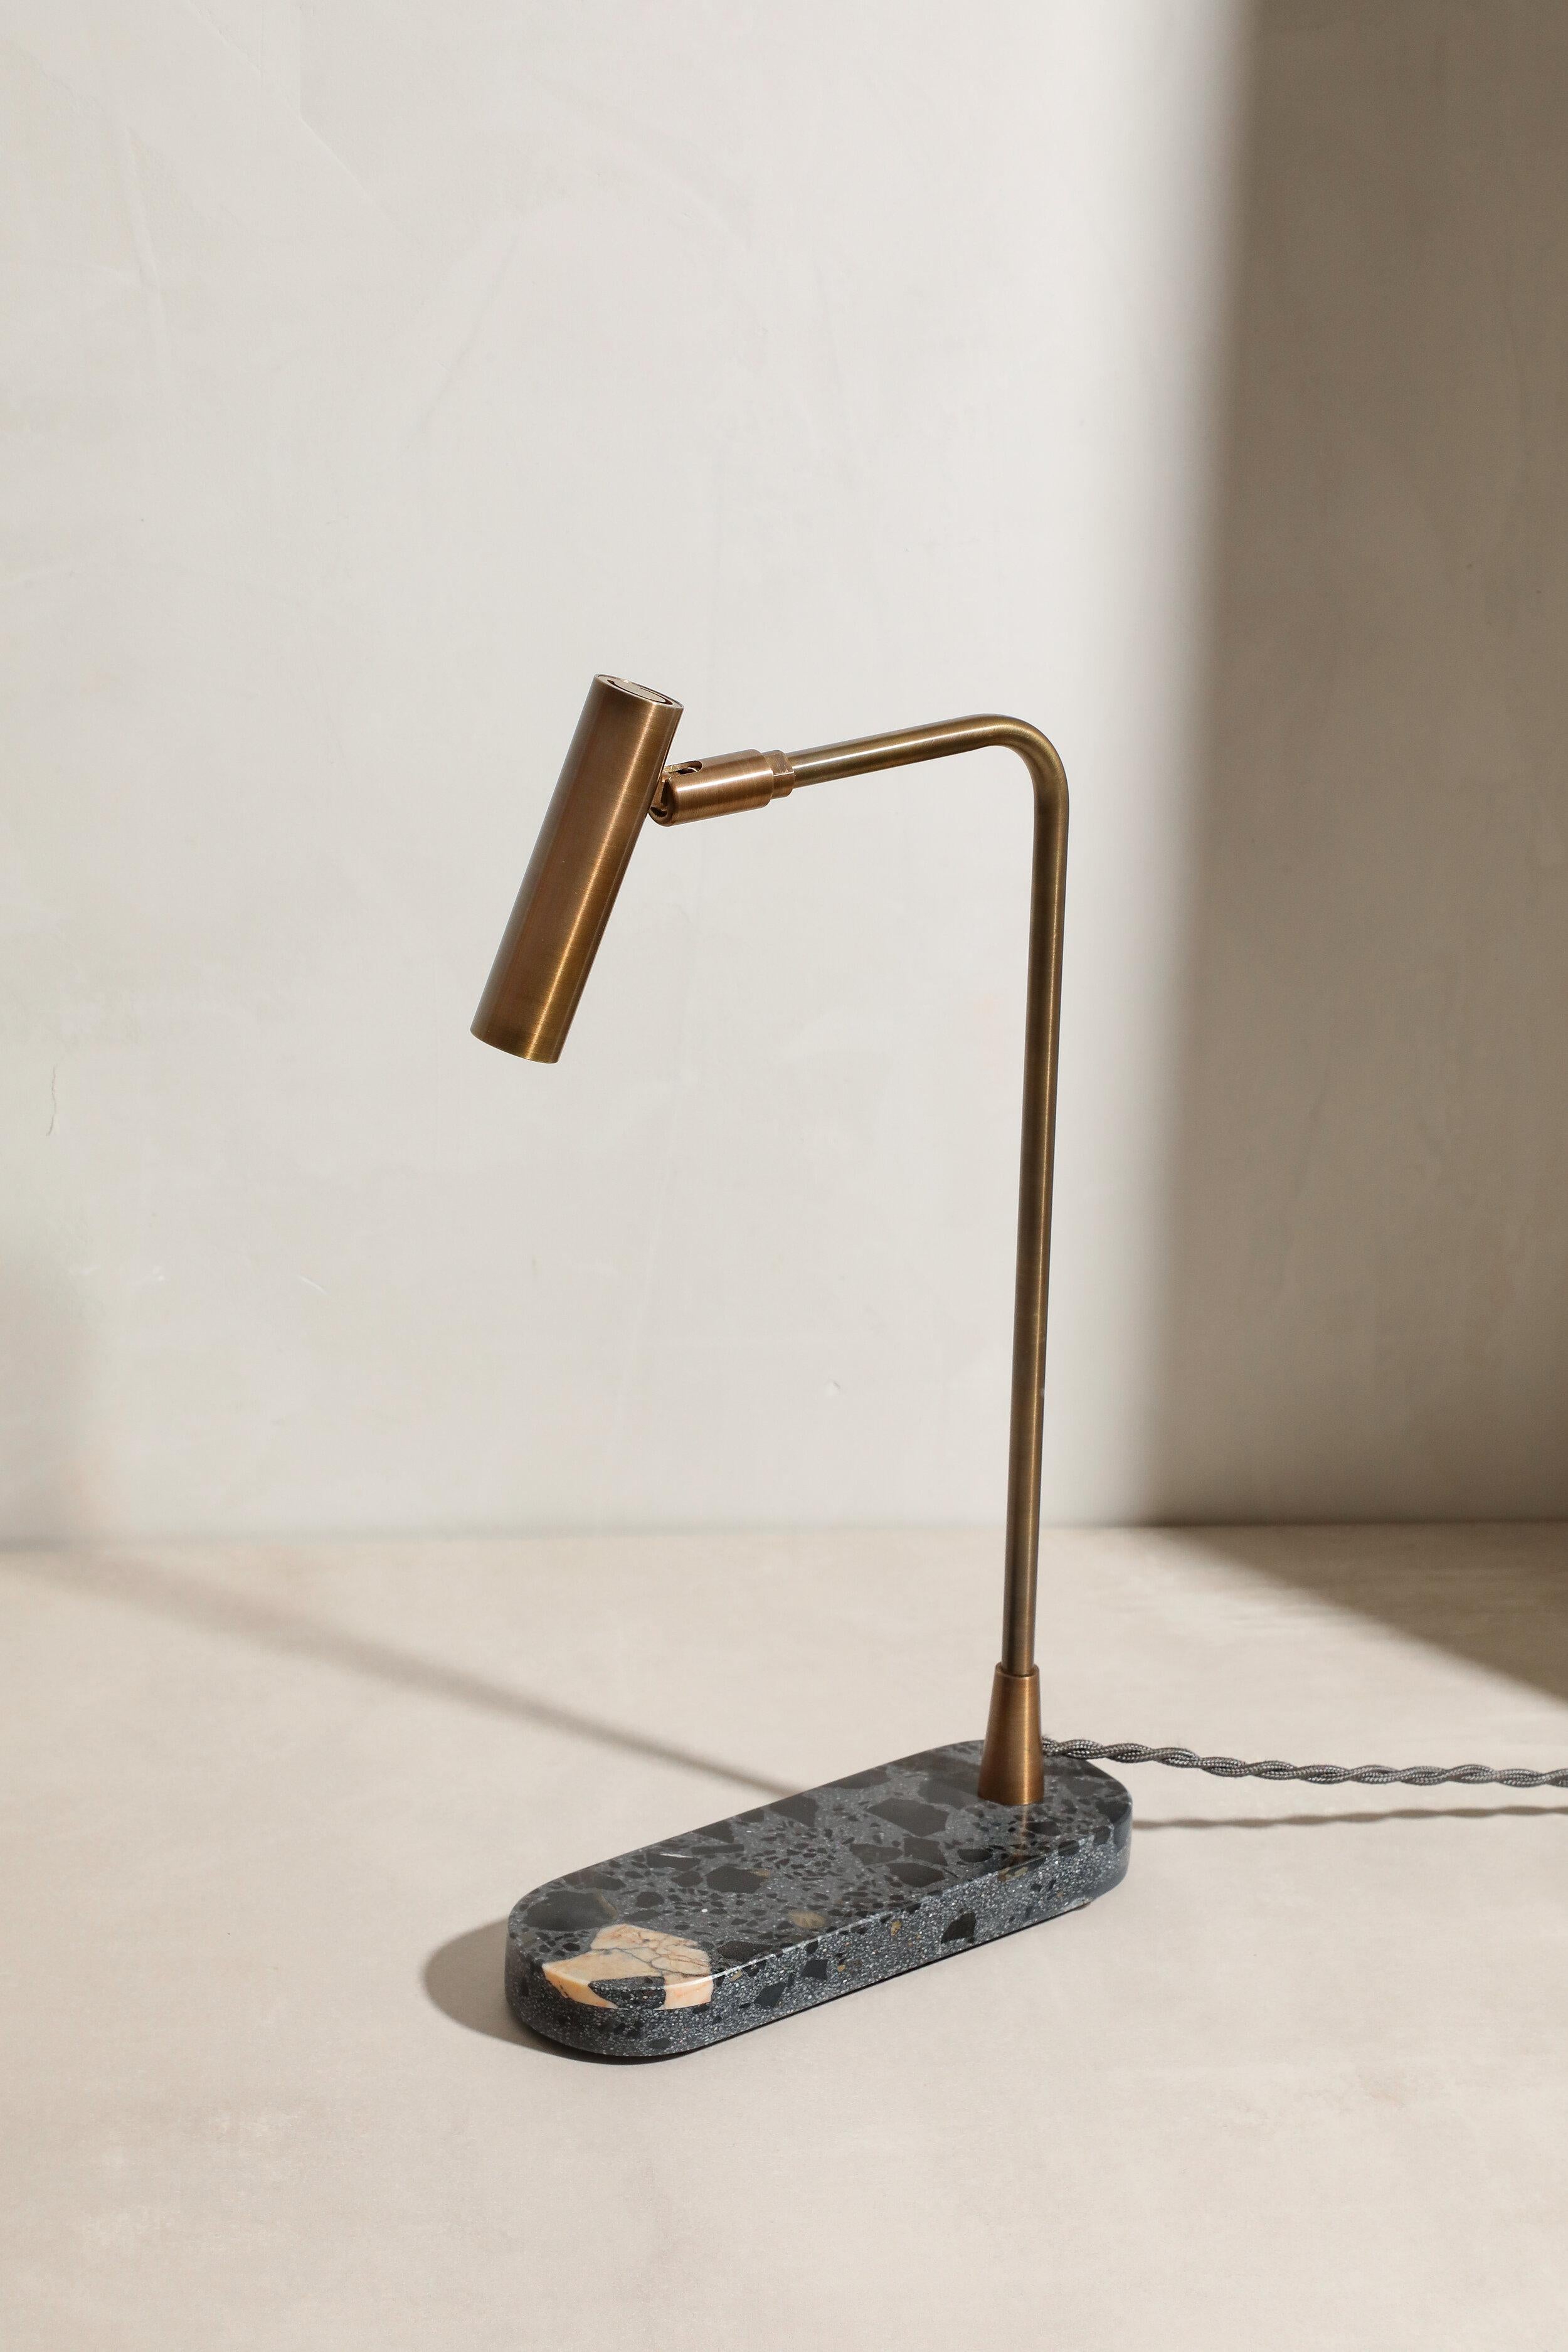 Book table lamp by Contain.
Dimensions: D 7 x W 33 x H 20.5 cm (standard length).
Materials: brass structure and stone base.
Available in different finishes.

All our lamps can be wired according to each country. If sold to the USA it will be